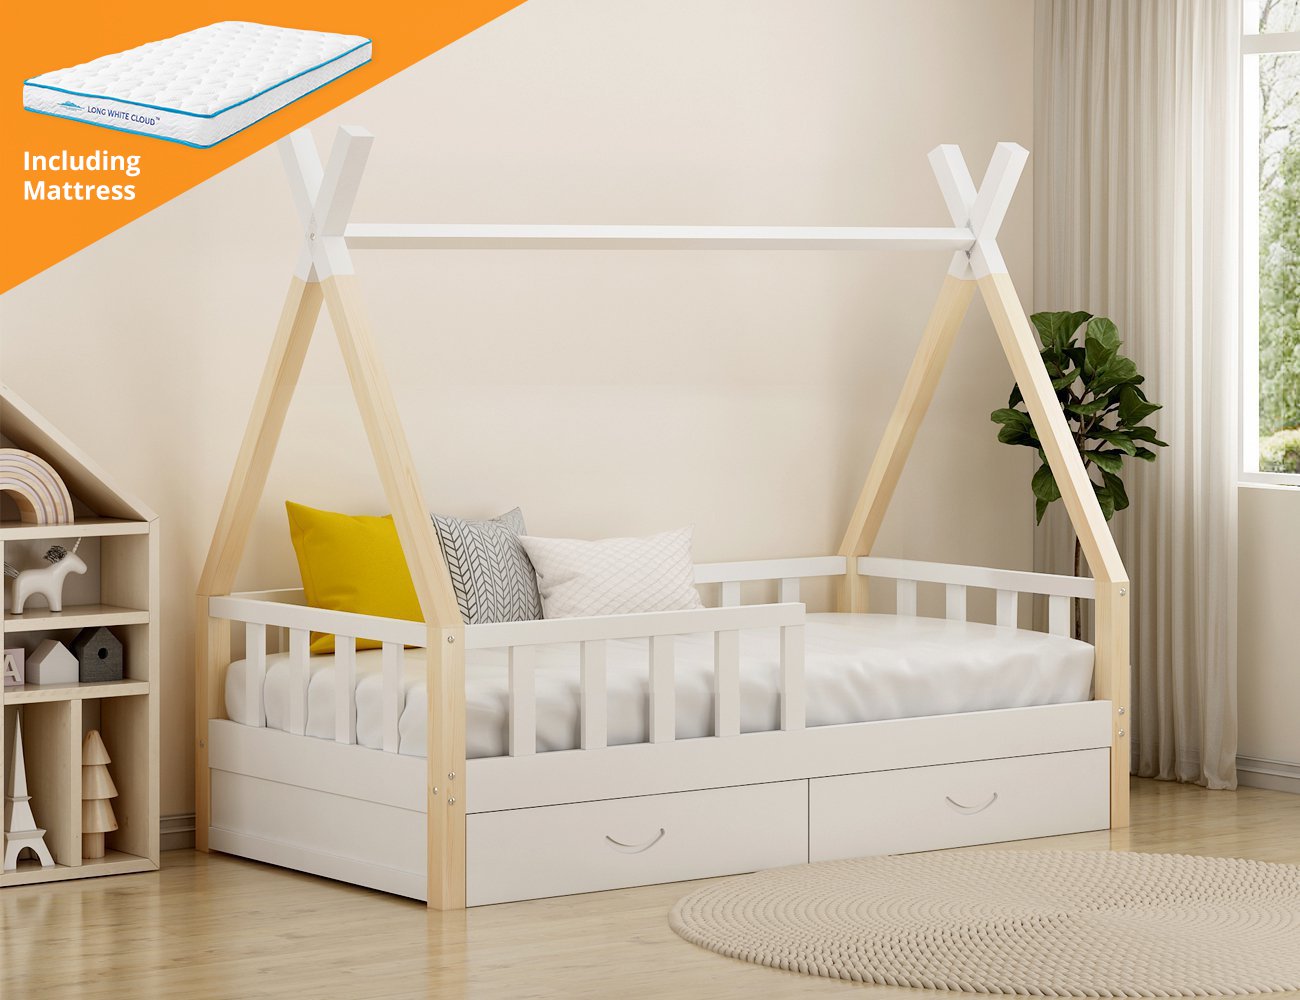 mattress for toddler single bed